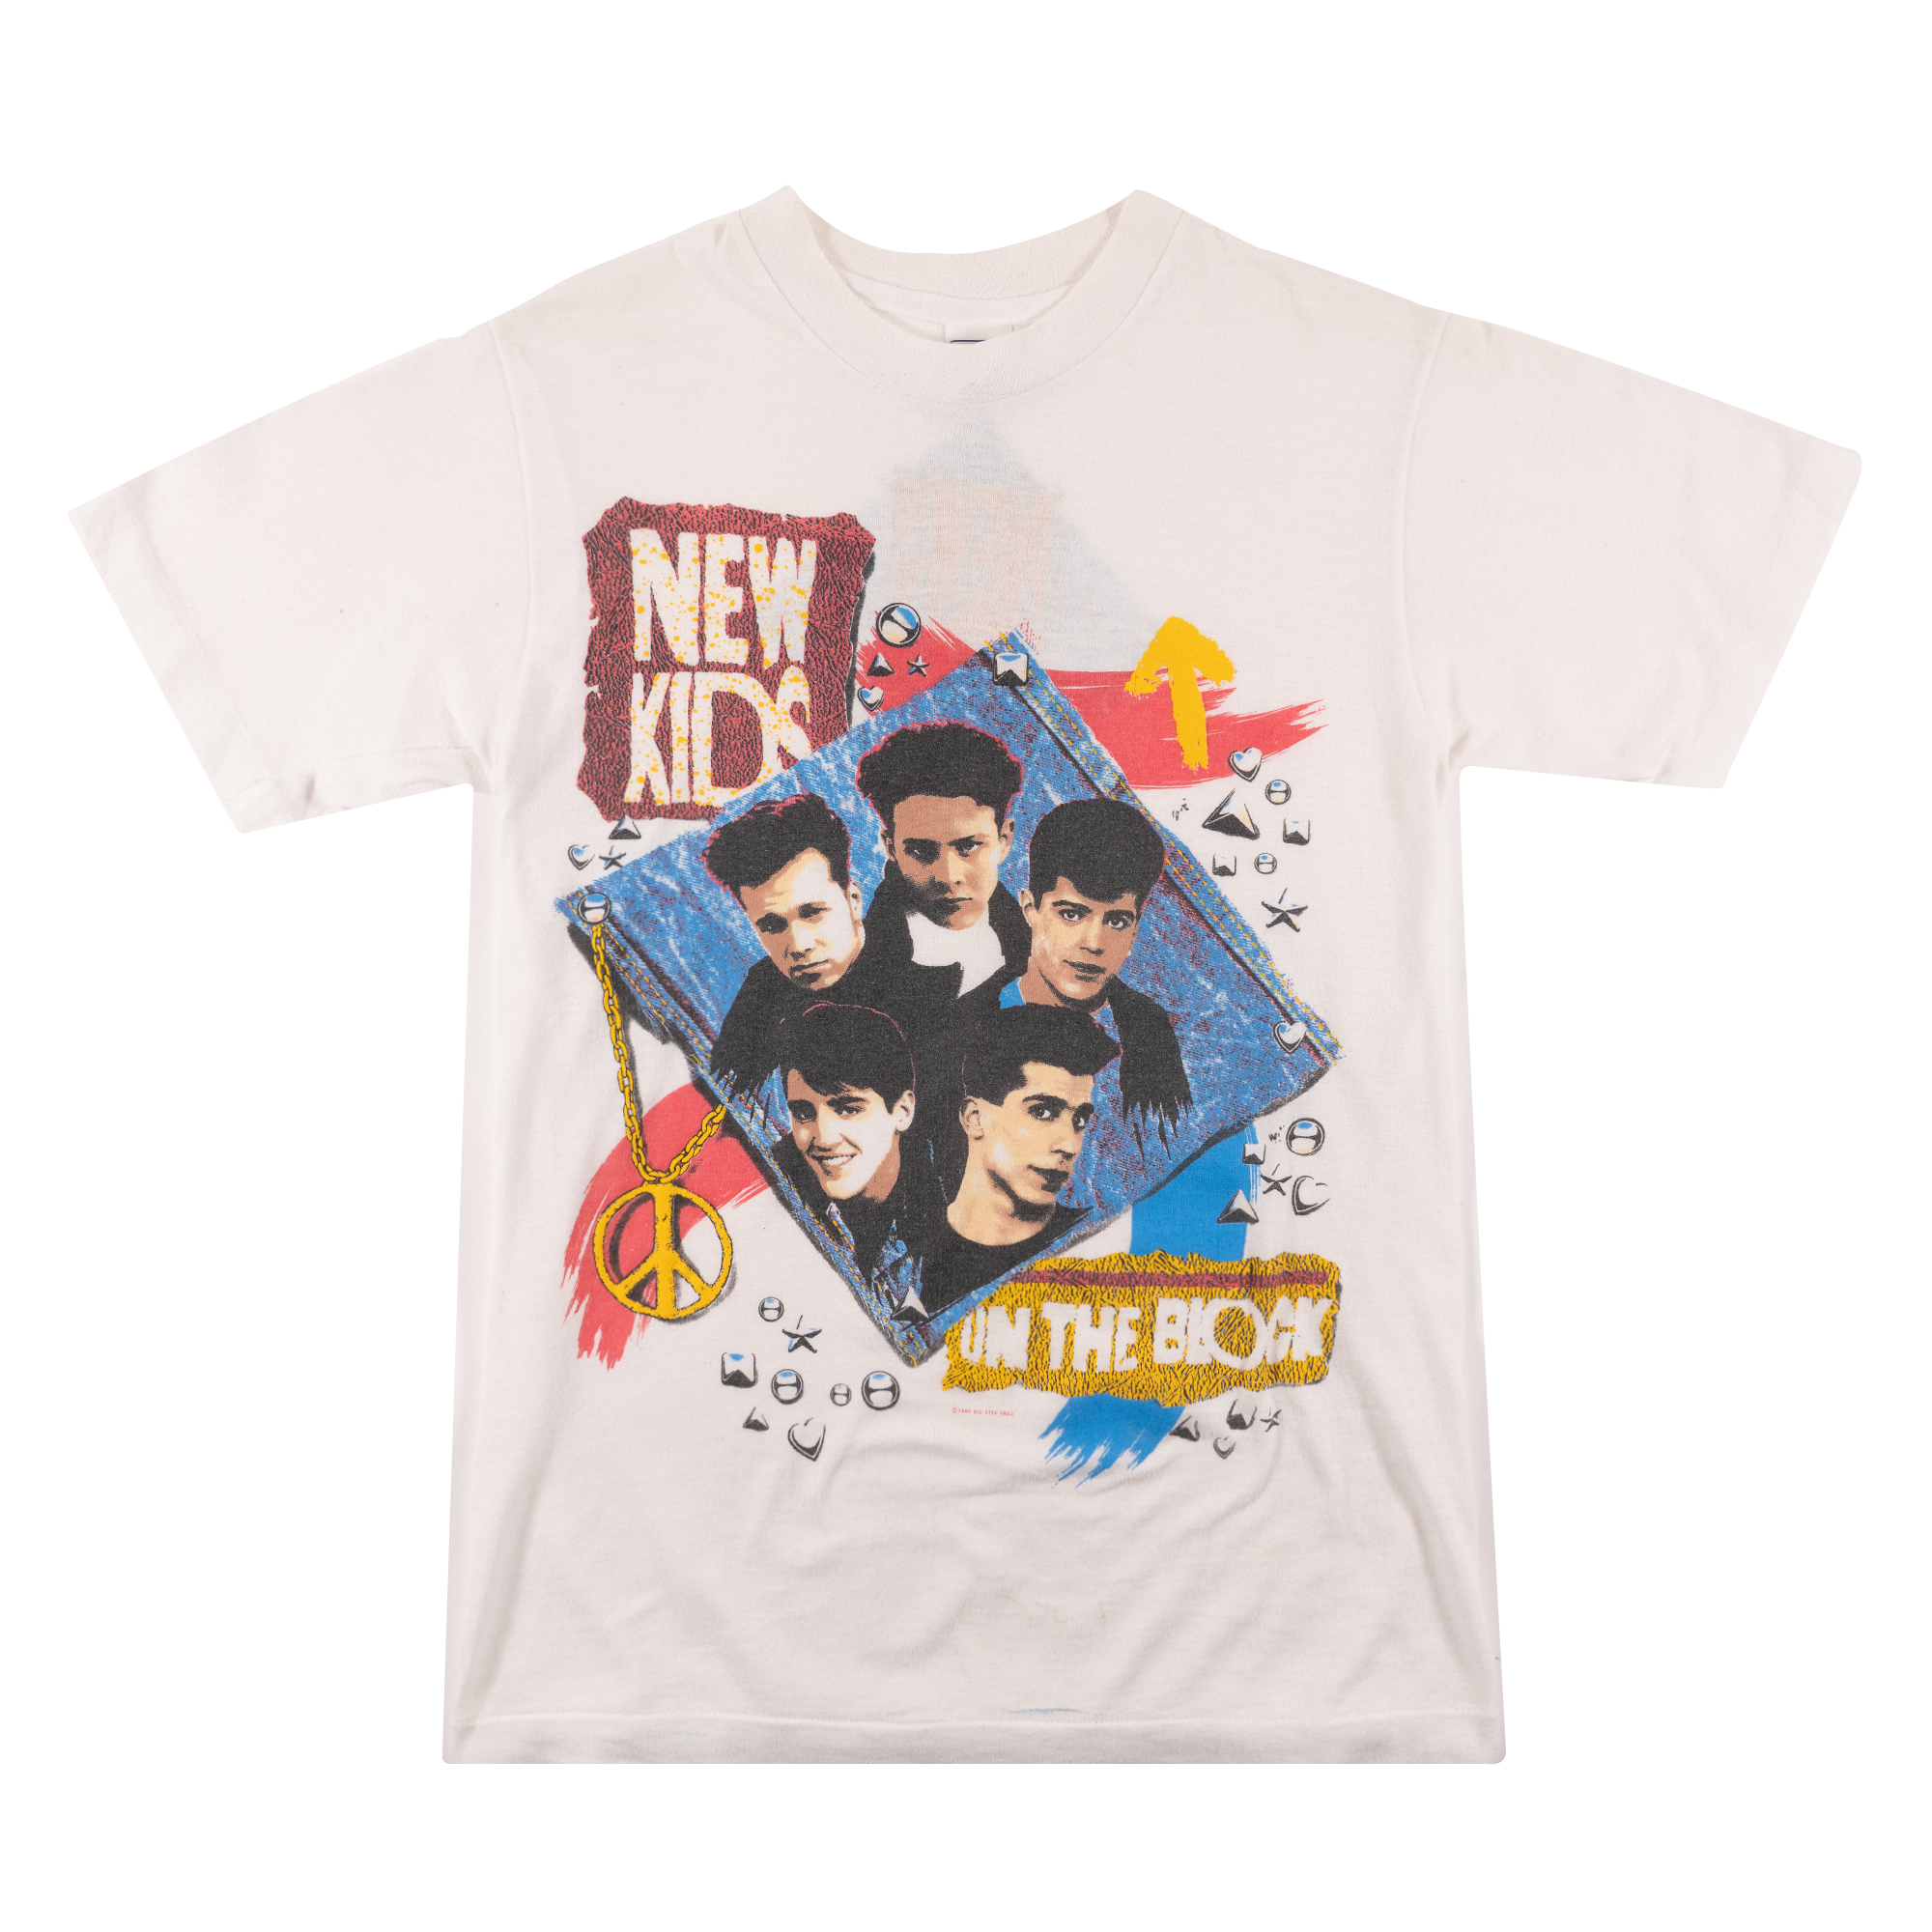 New Kids On The Block Denim Diamond Faces Ched Tag 1990 Tee White-PLUS